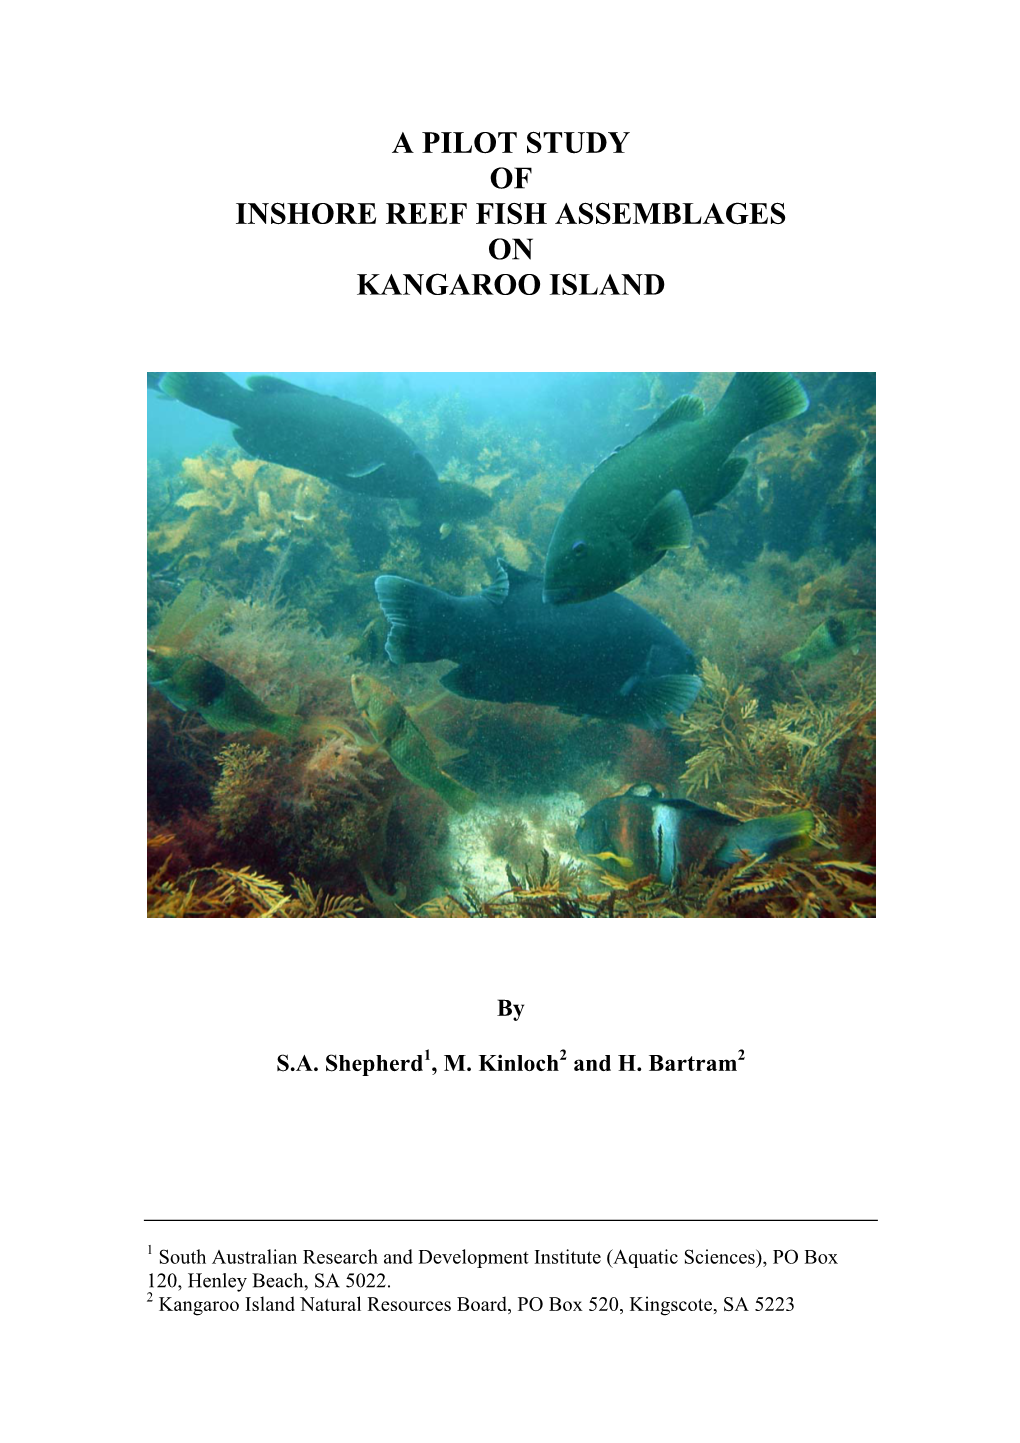 A Pilot Study of Littoral Fish Assemblages on Kangaroo